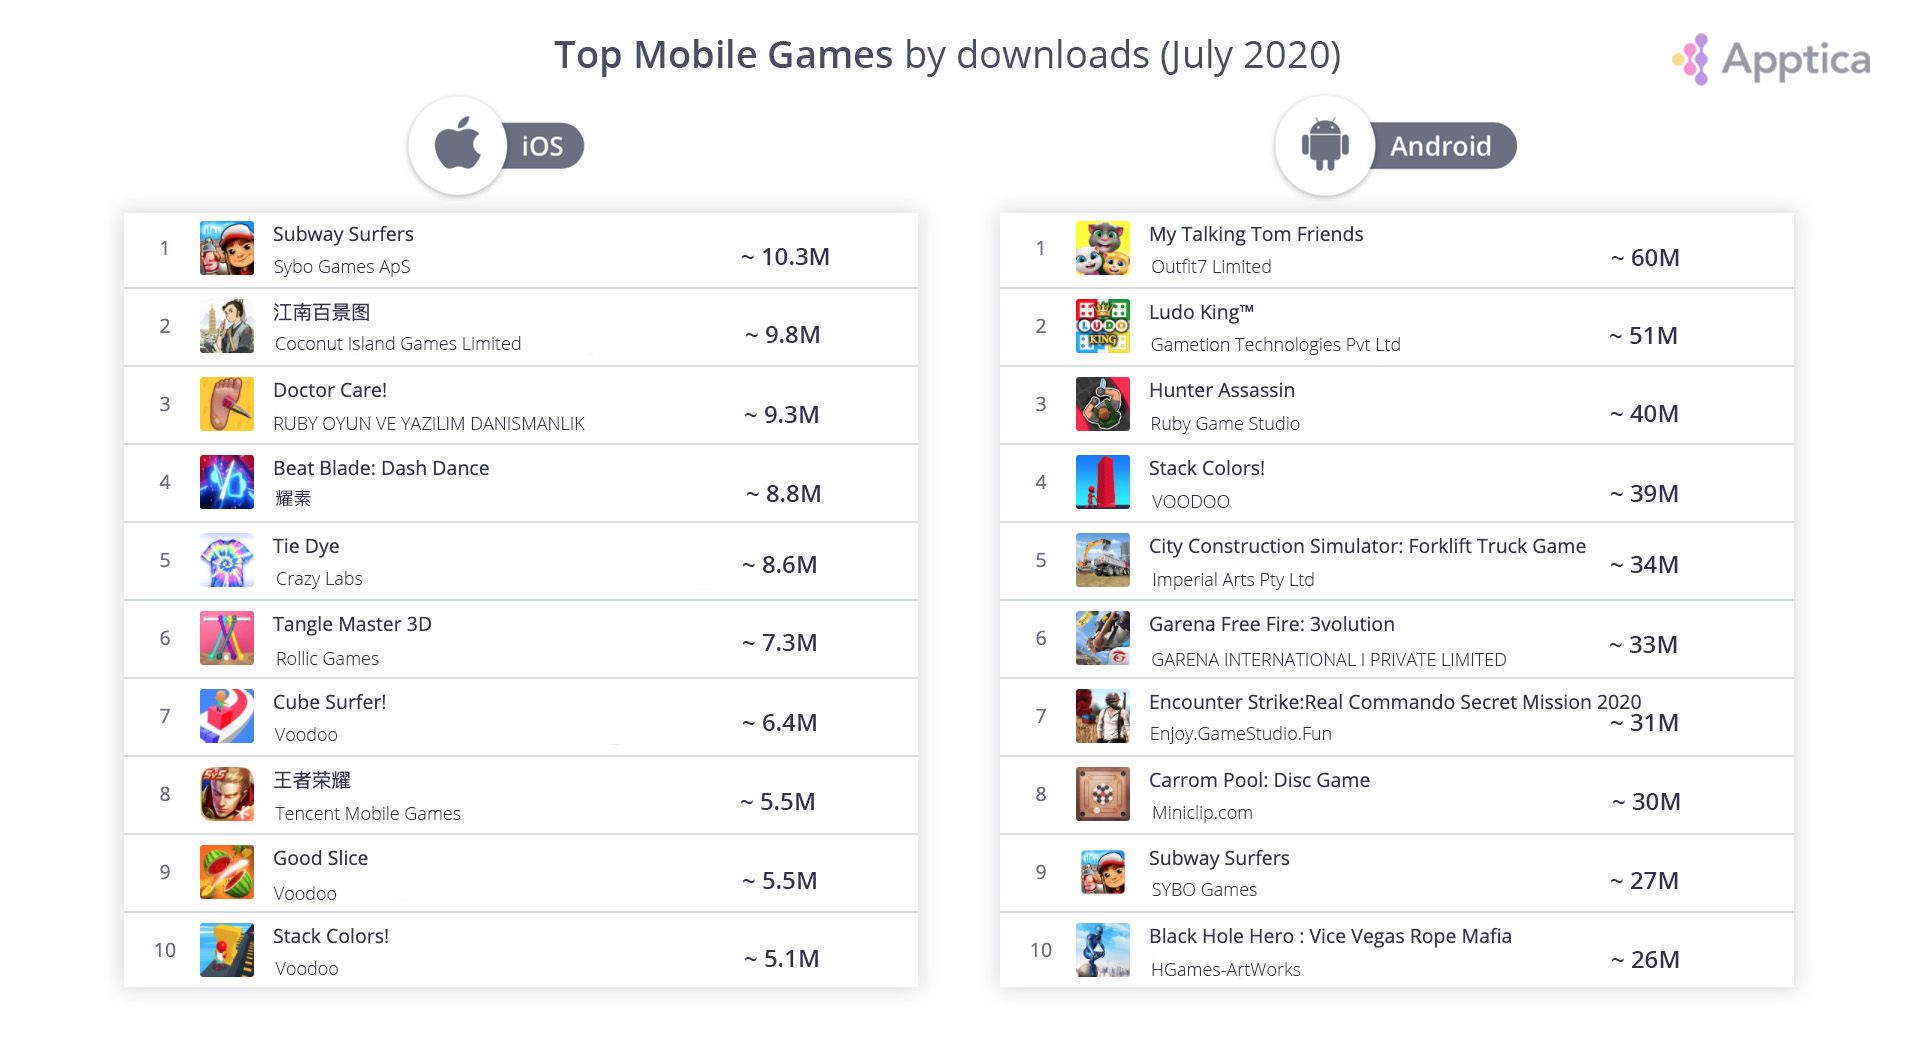 Best Mobile Games Of July By Installs